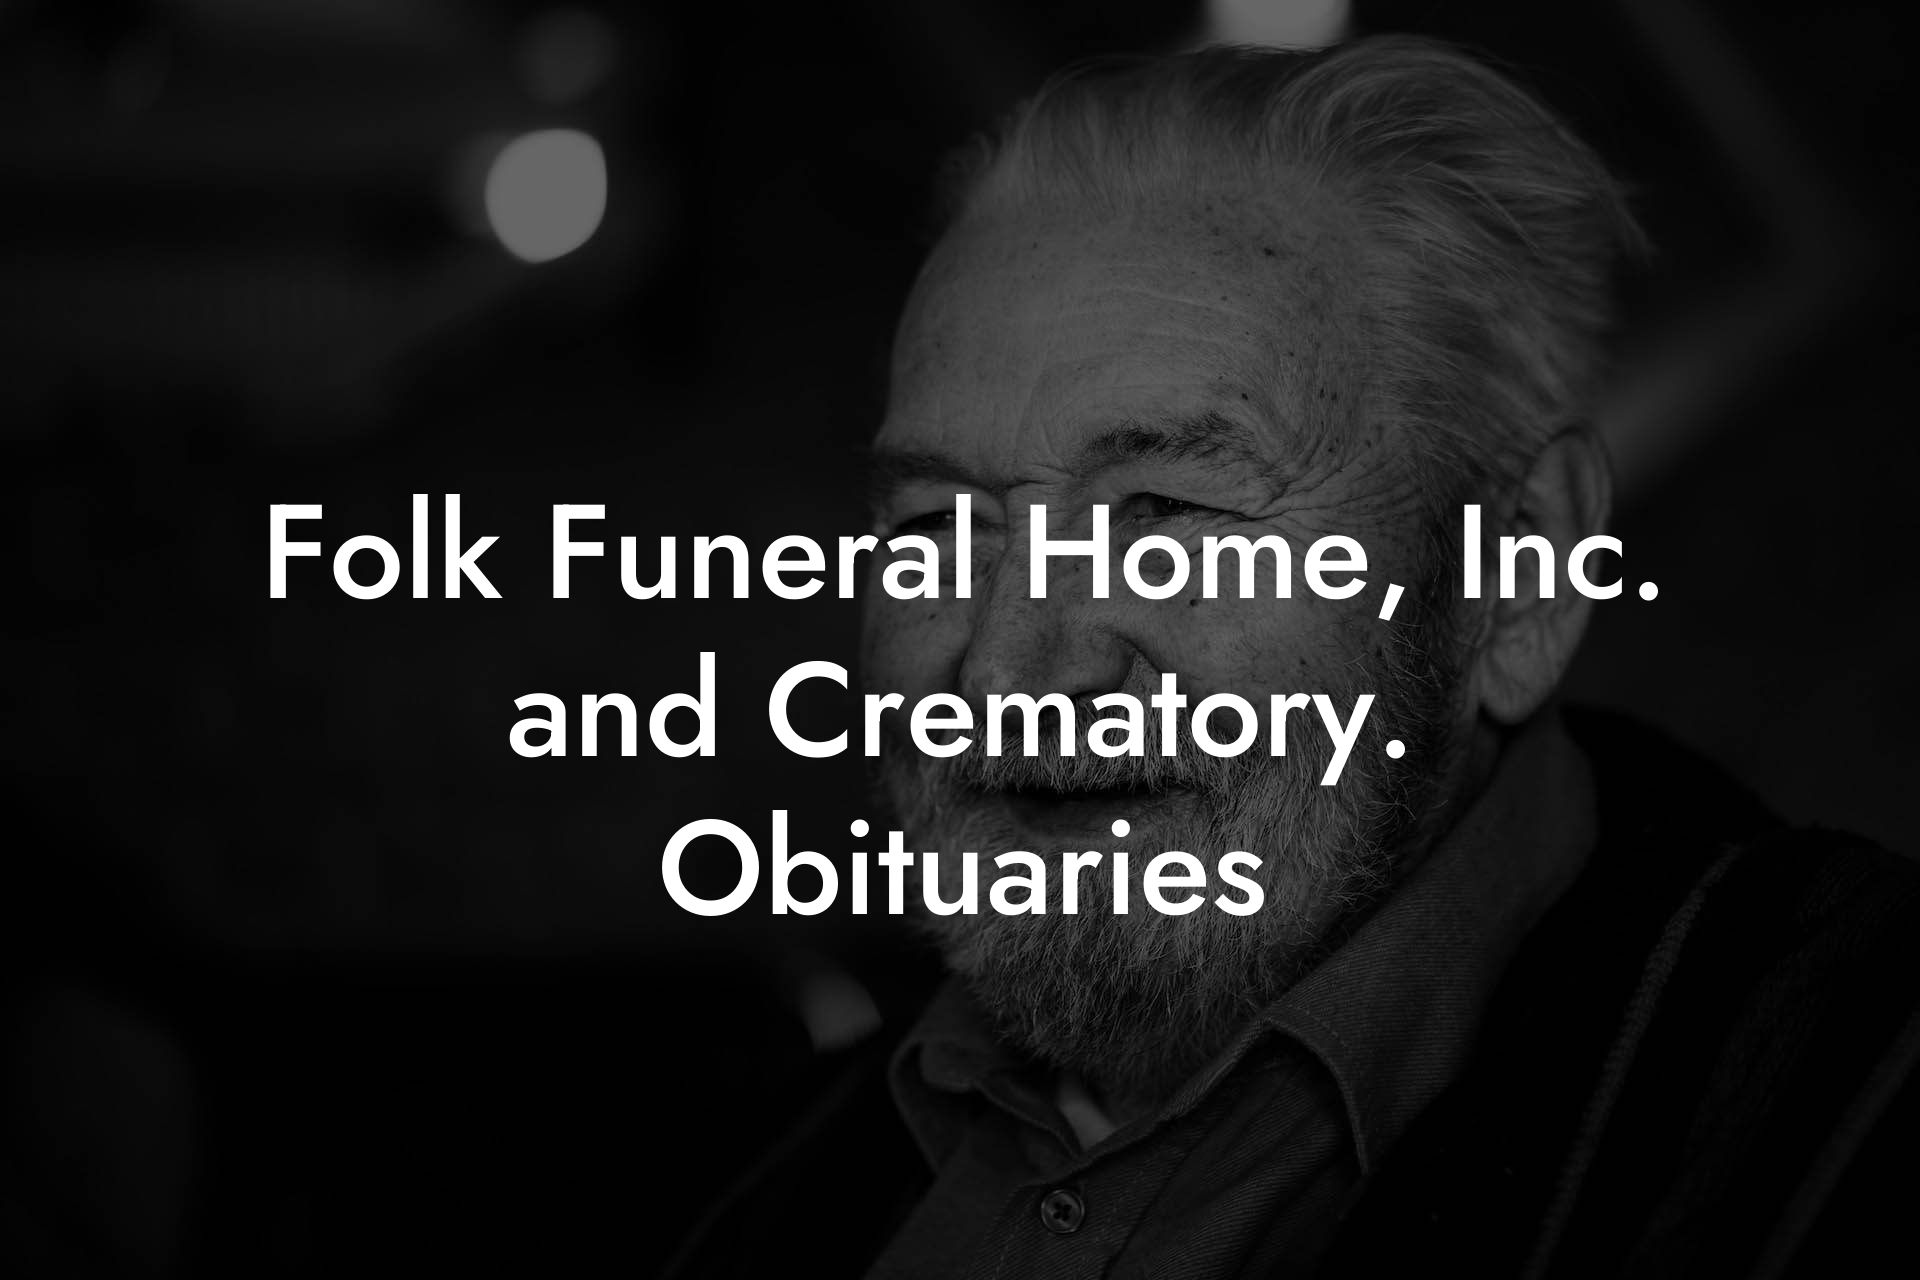 Folk Funeral Home, Inc. and Crematory. Obituaries